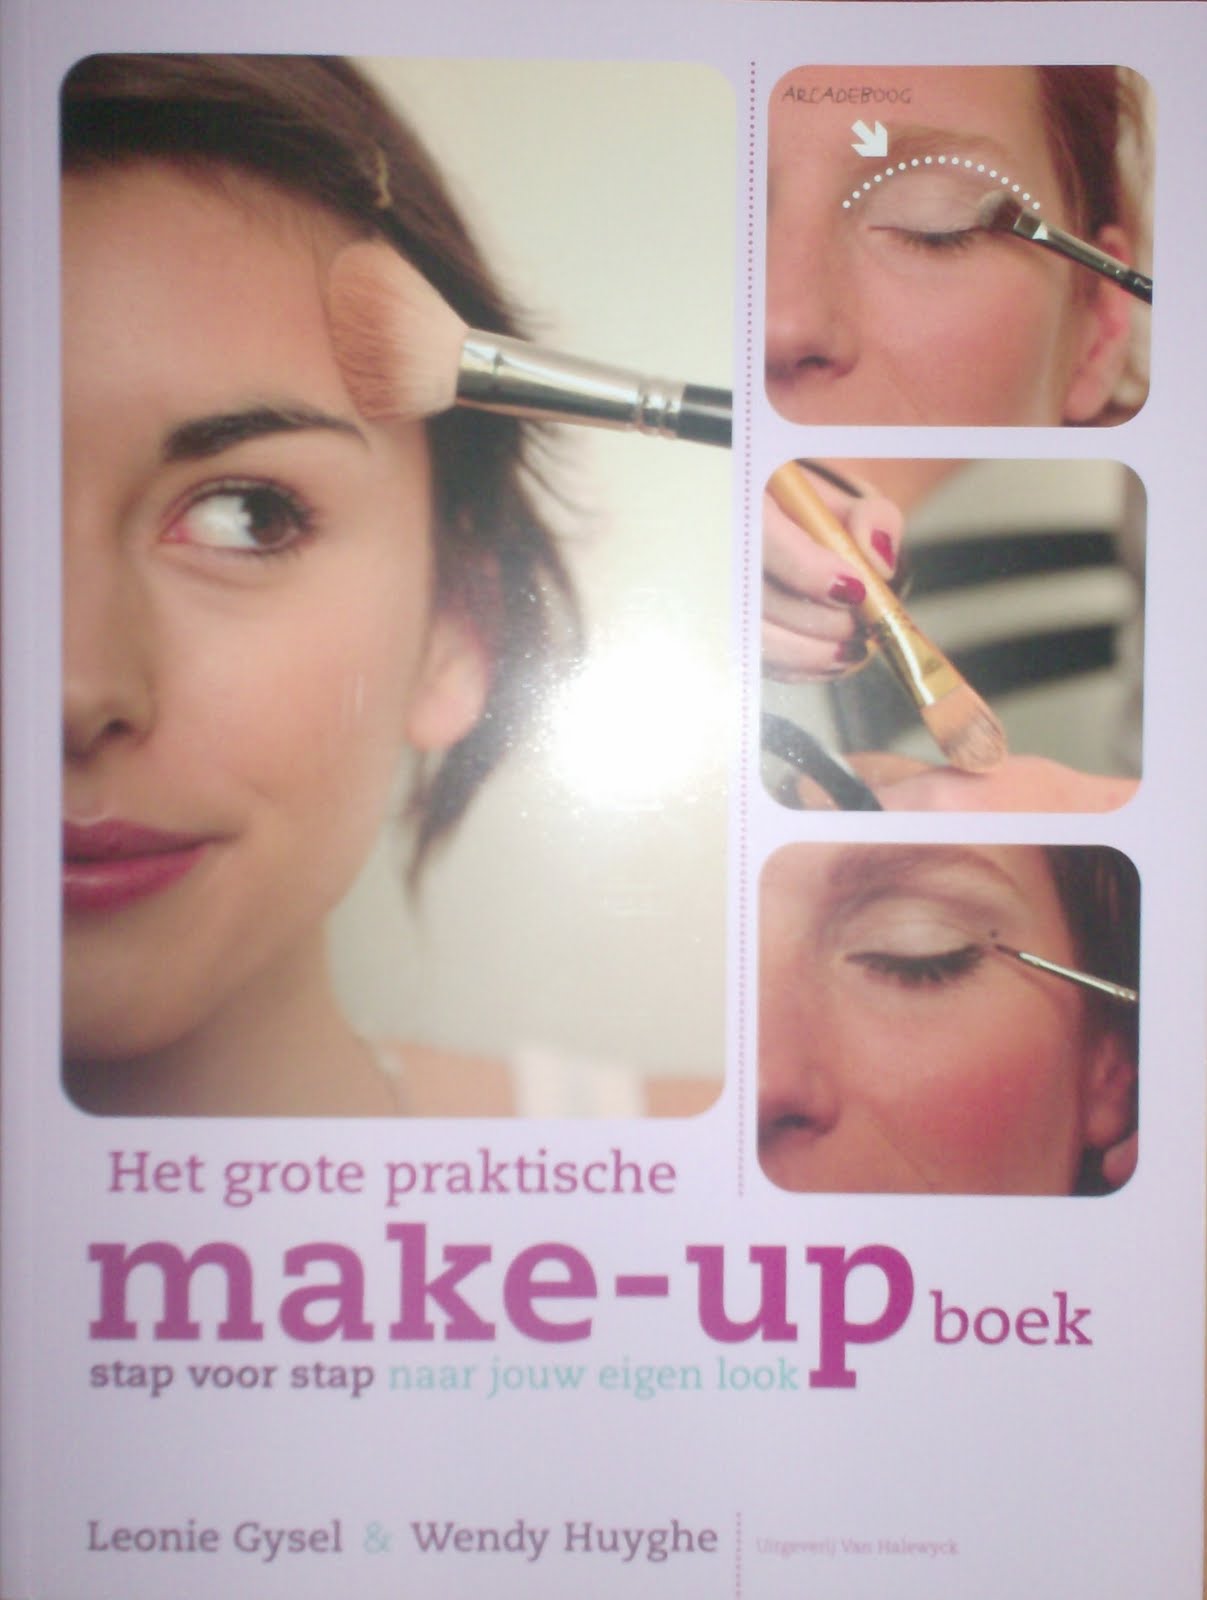 Because beauty is a passion: grote praktische boek Leonie Gysel & Wendy Huyghe